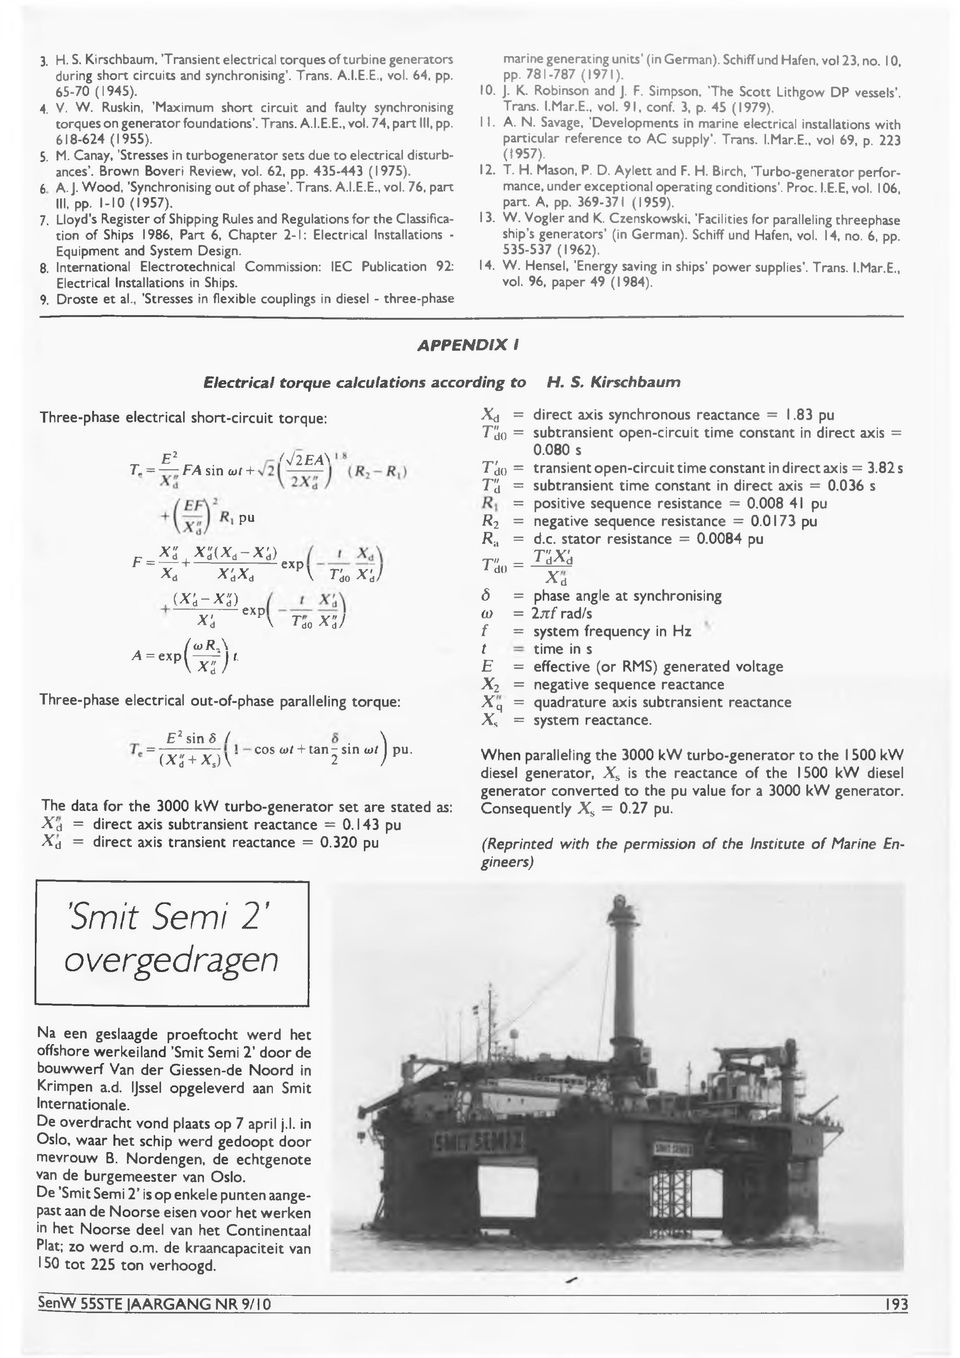 Canay, 'Stresses in turbogenerator sets due to electrical disturbances*. Brown Boveri Review, vol. 62, pp. 435-443 (1975). 6 A. J. W ood, 'Synchronising out of phase. Trans. A.I.E.E., vol. 76, part III, pp.